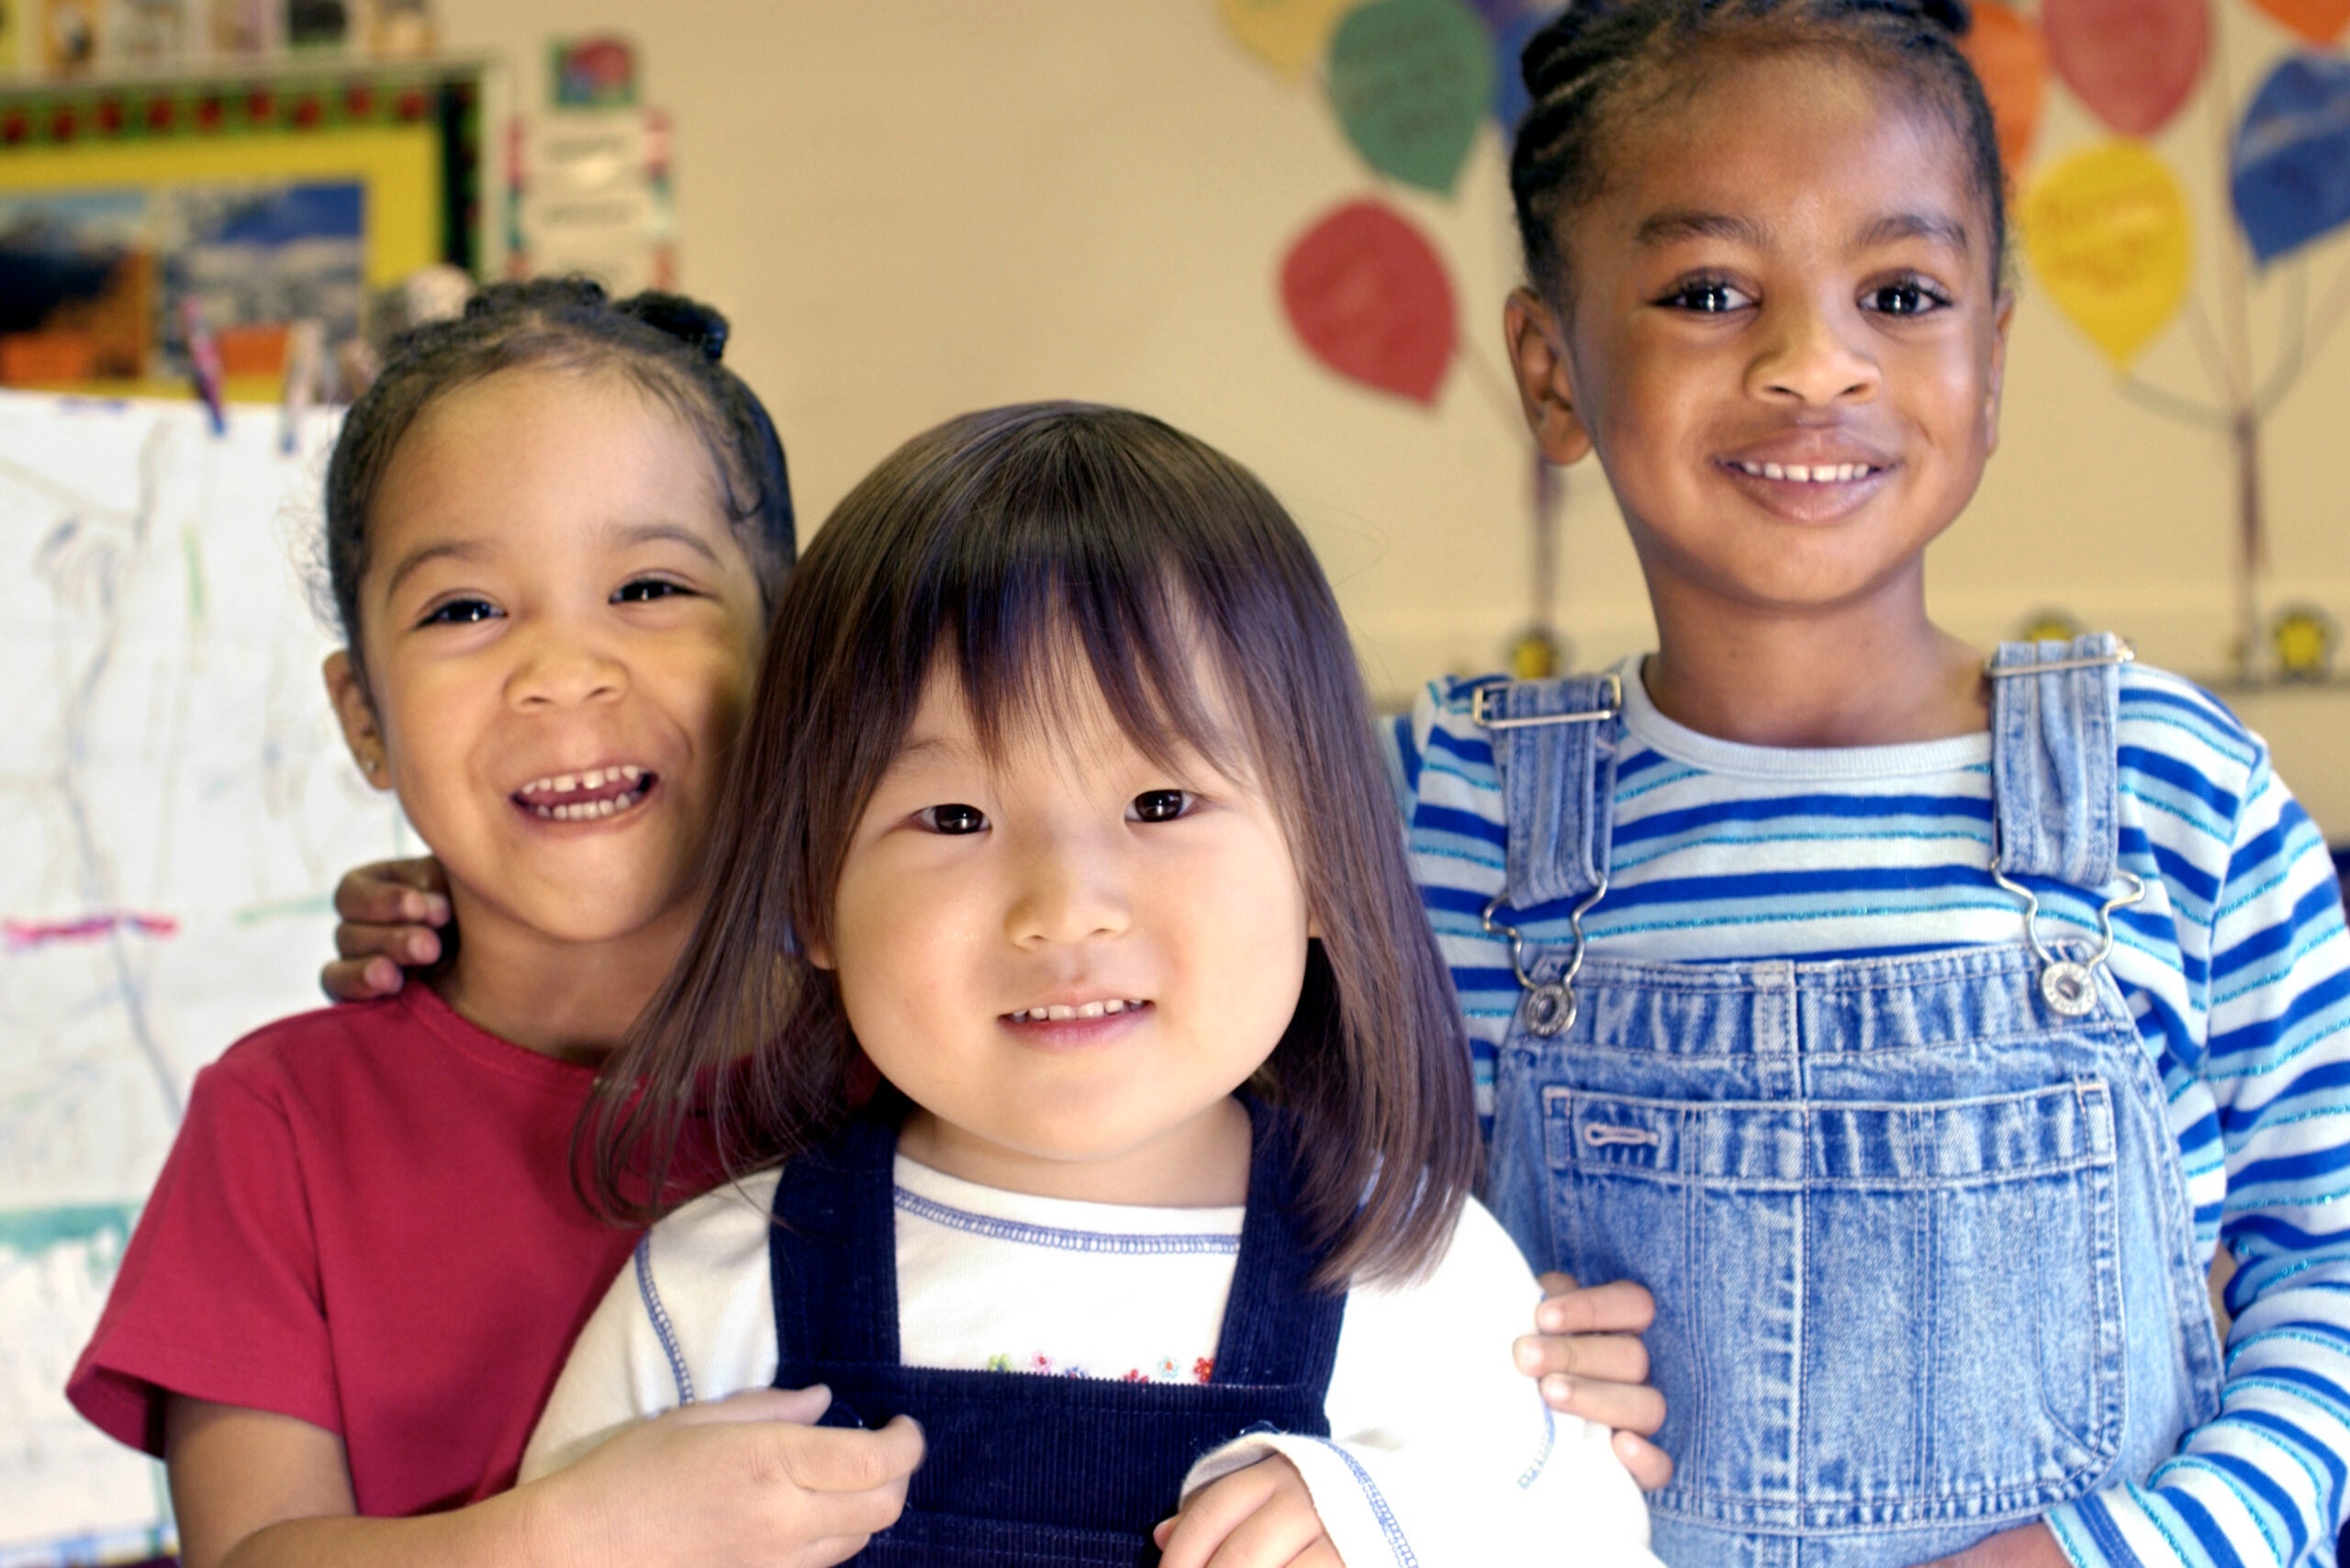 One Latina girl with braided pulled back black hair and red shirt standing next to an Asian girl with dark brown/black hair wearing a white t-shirt and dark blue overalls standing next to a black girl with a blue/white striped t-shirt and blue jean overalls in a classroom.